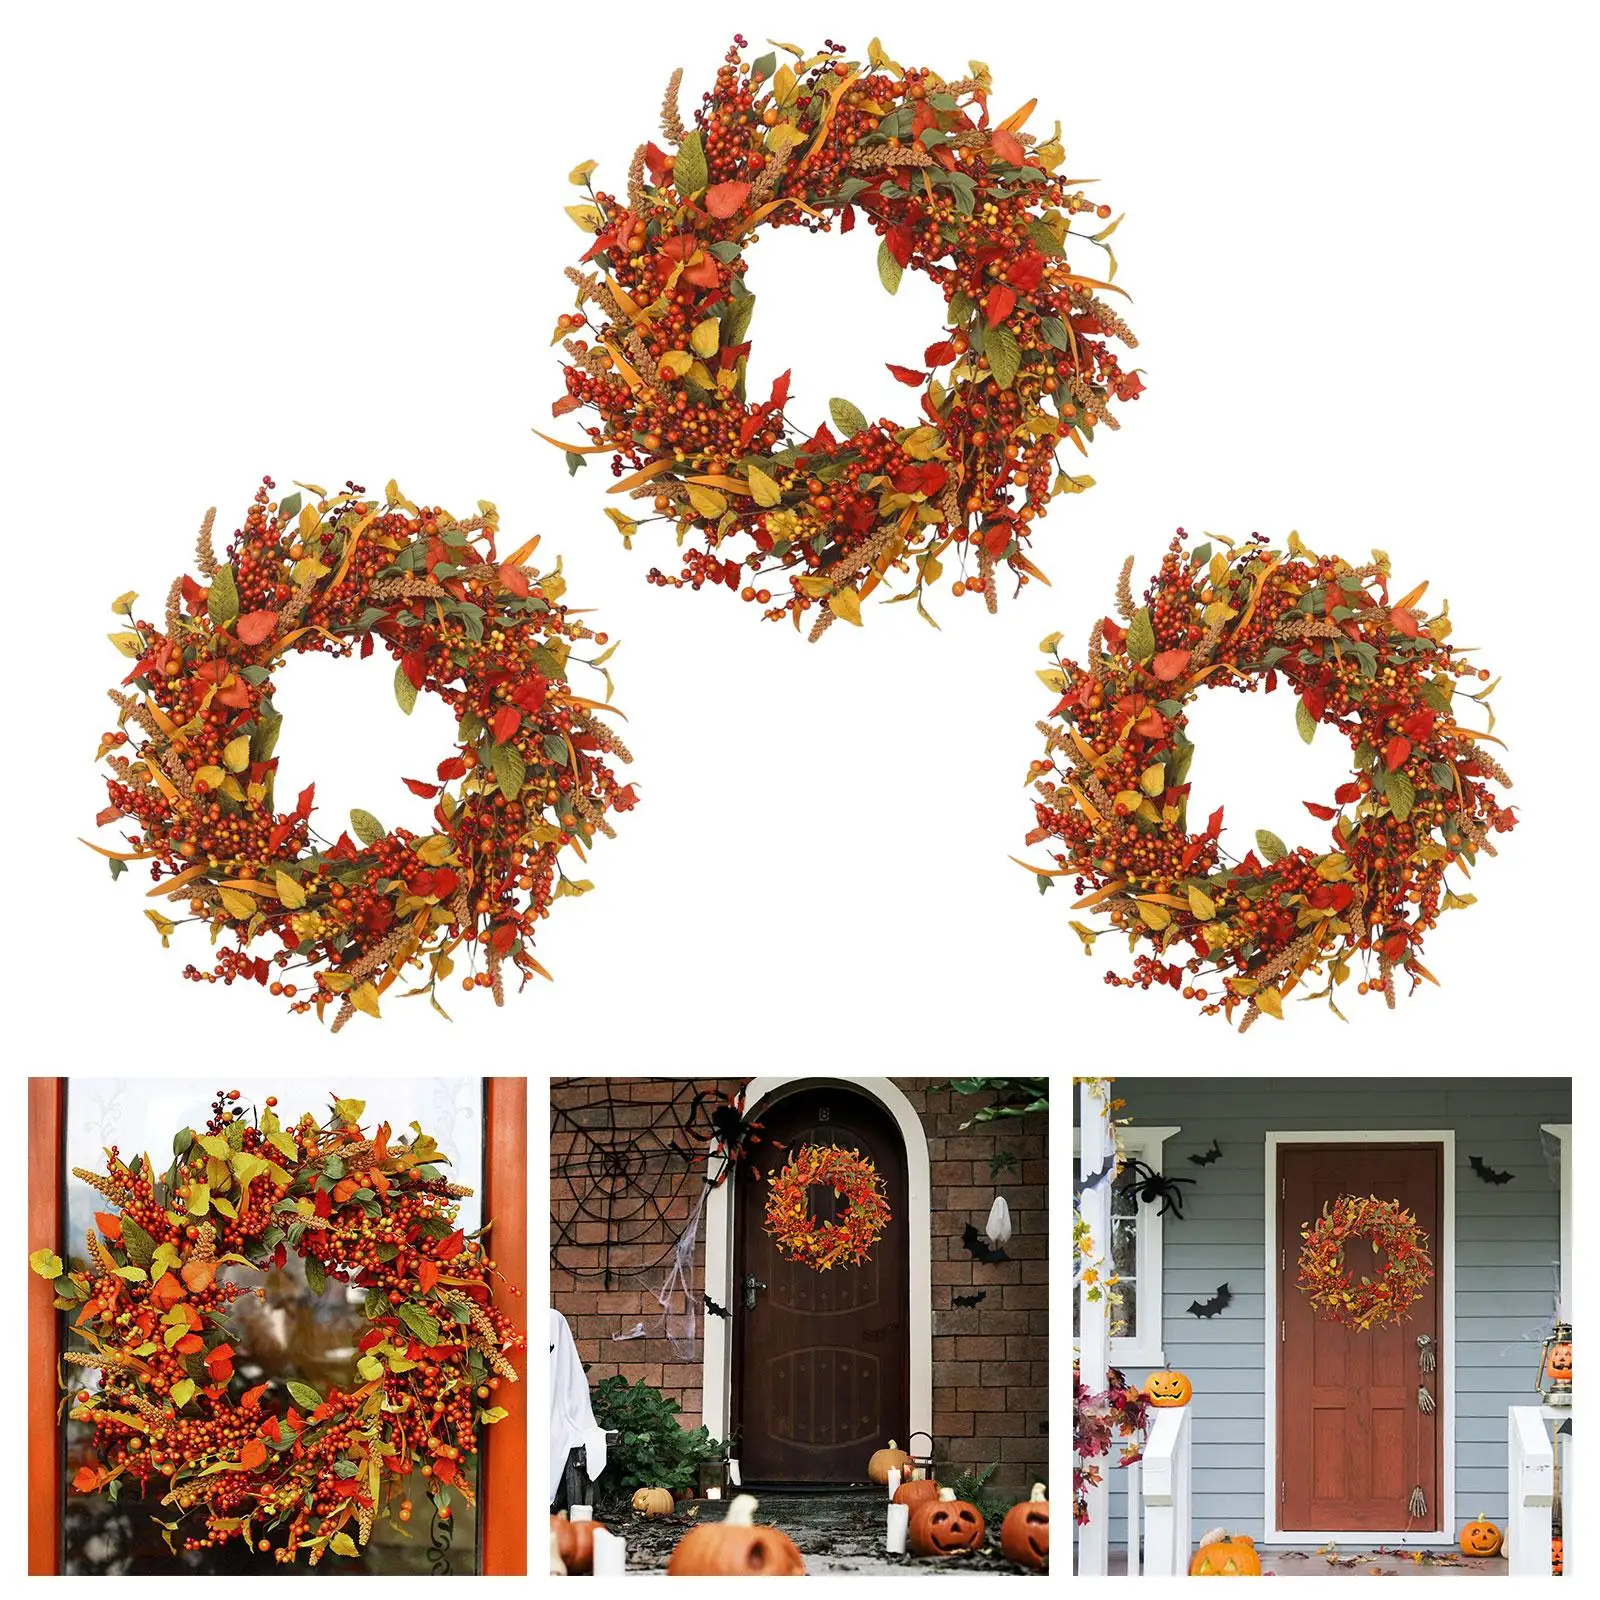 Fall Wreath Autumn Wreath with Yellow and Green Leaves Harvest Wreath Fall Berries Wreath for Front Door Halloween Festival